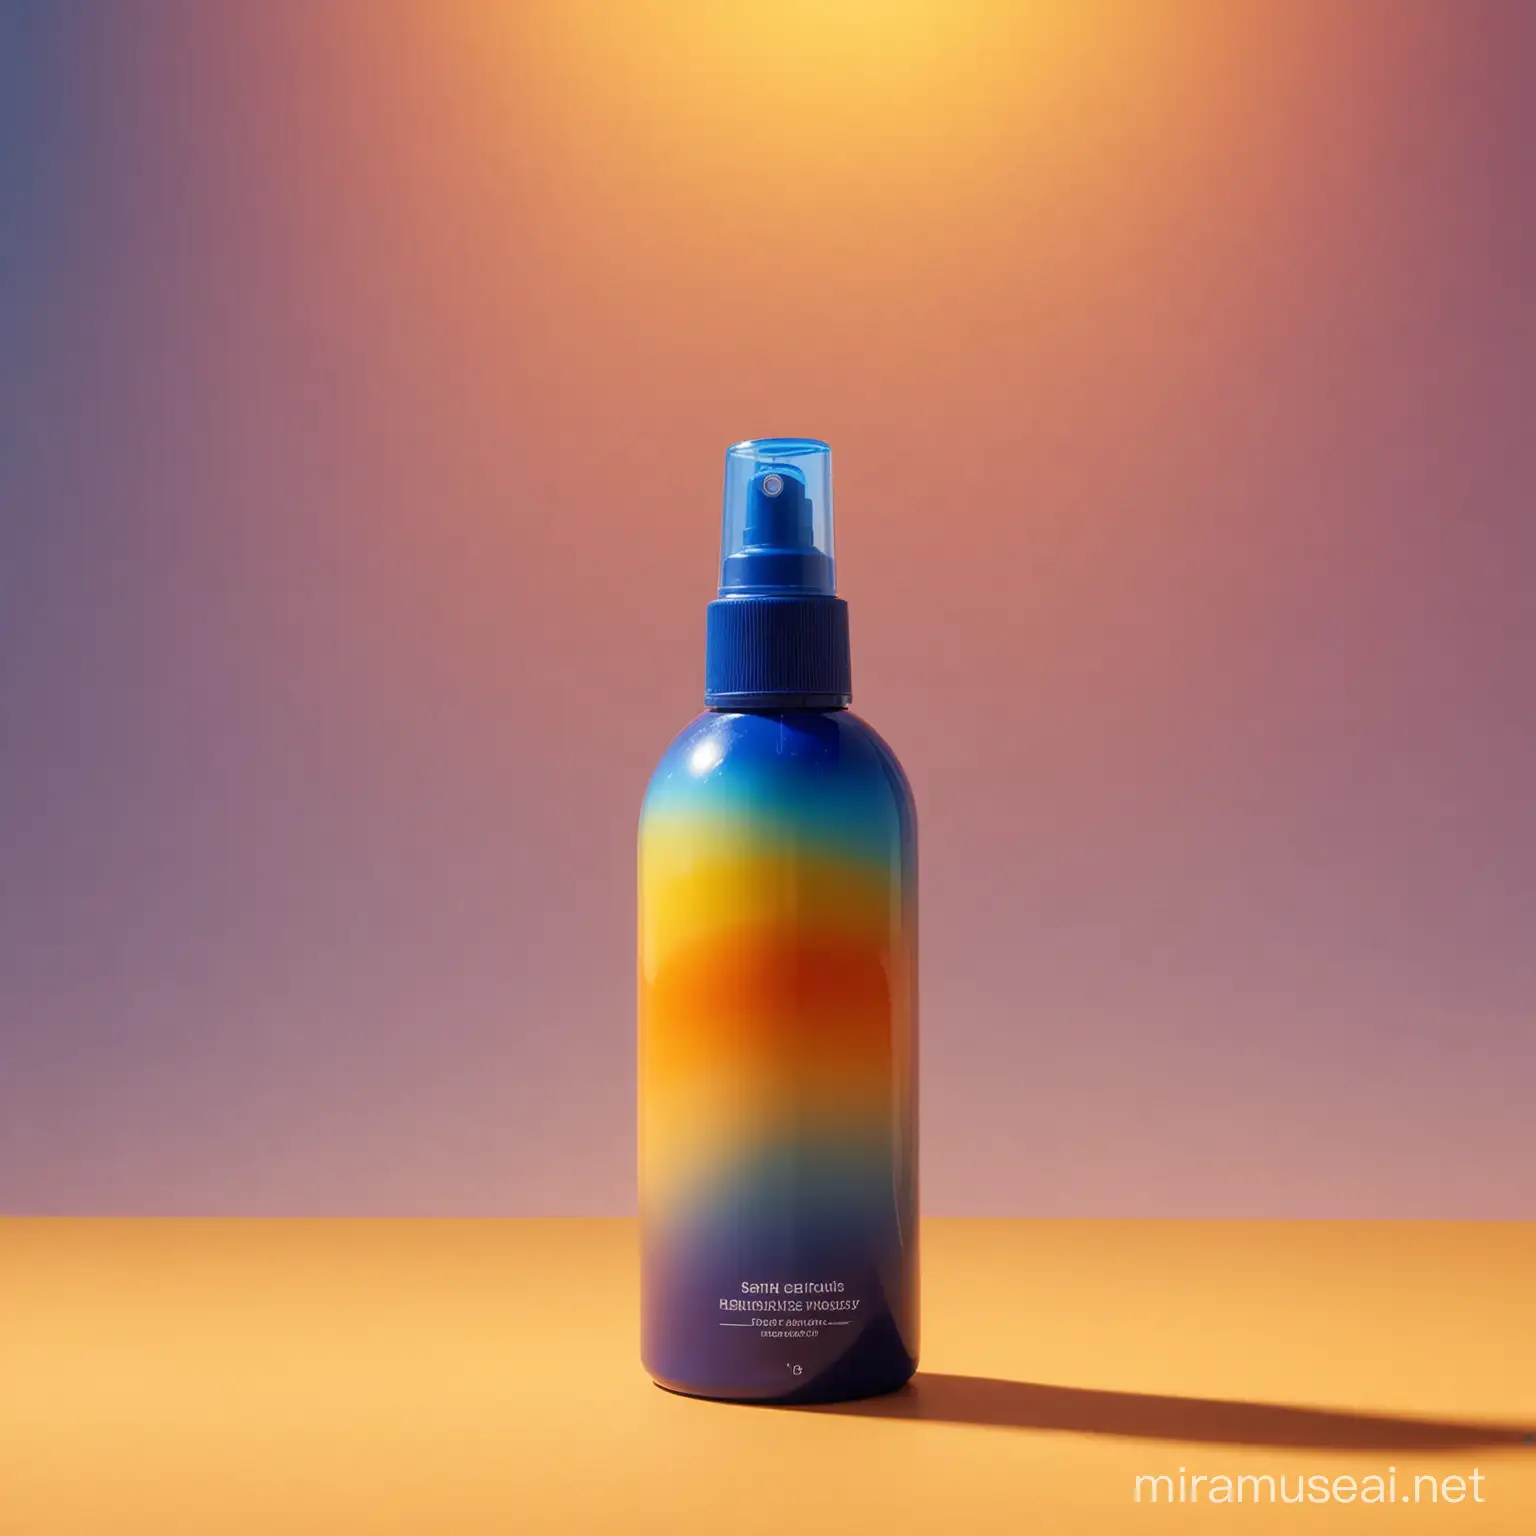 a gradient spray bottle from blue to orange(background), with a yellow sun on the background